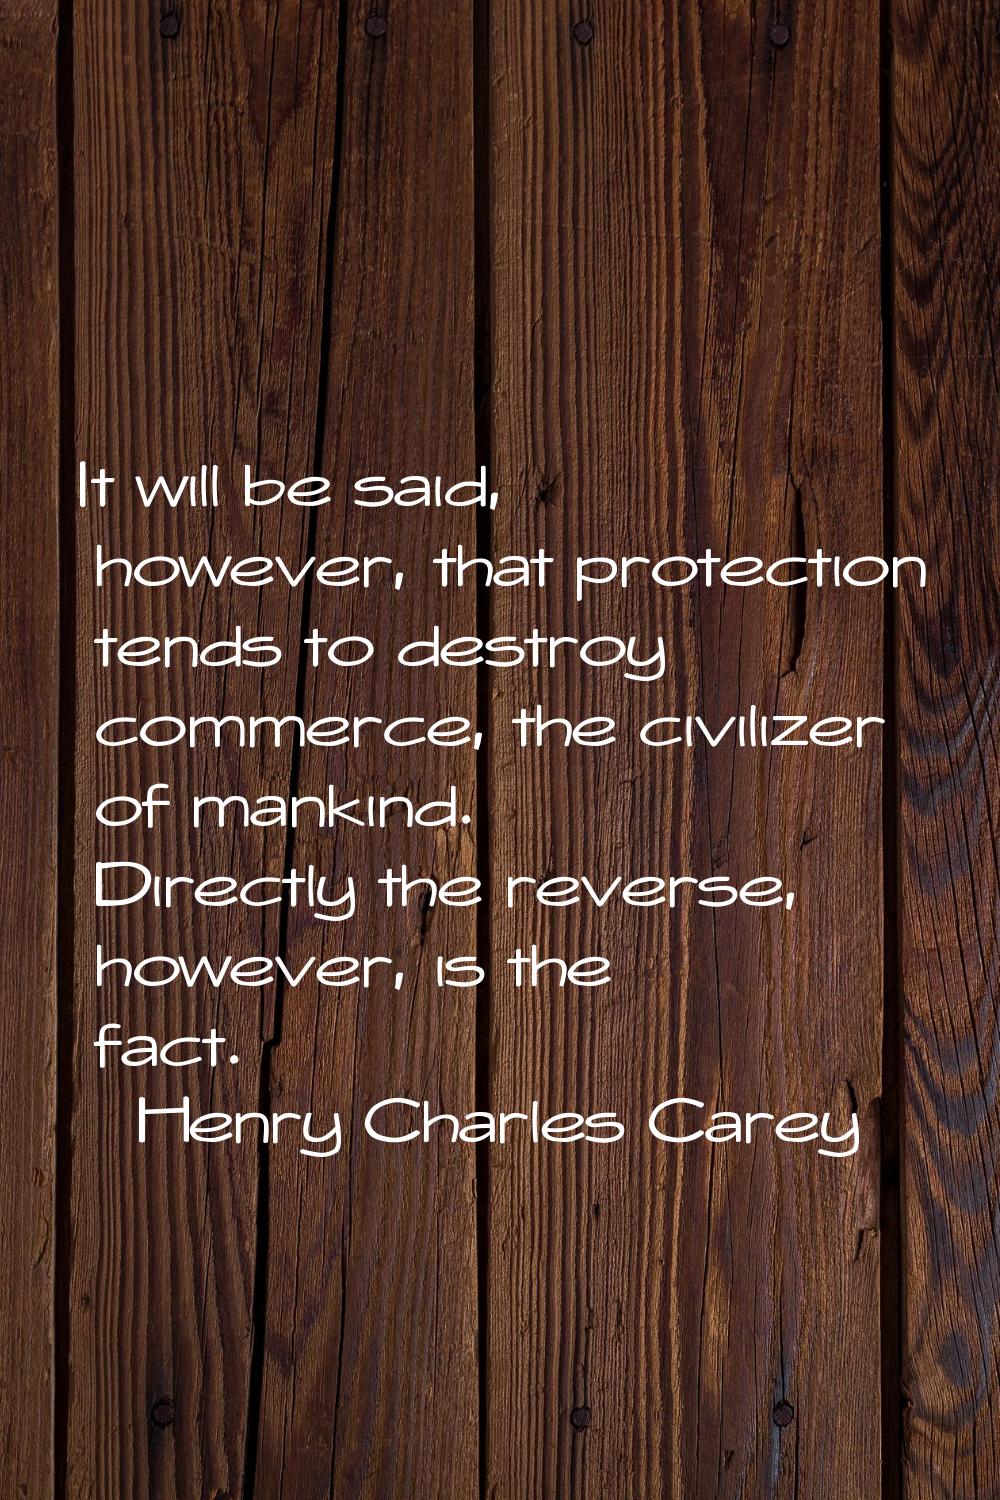 It will be said, however, that protection tends to destroy commerce, the civilizer of mankind. Dire